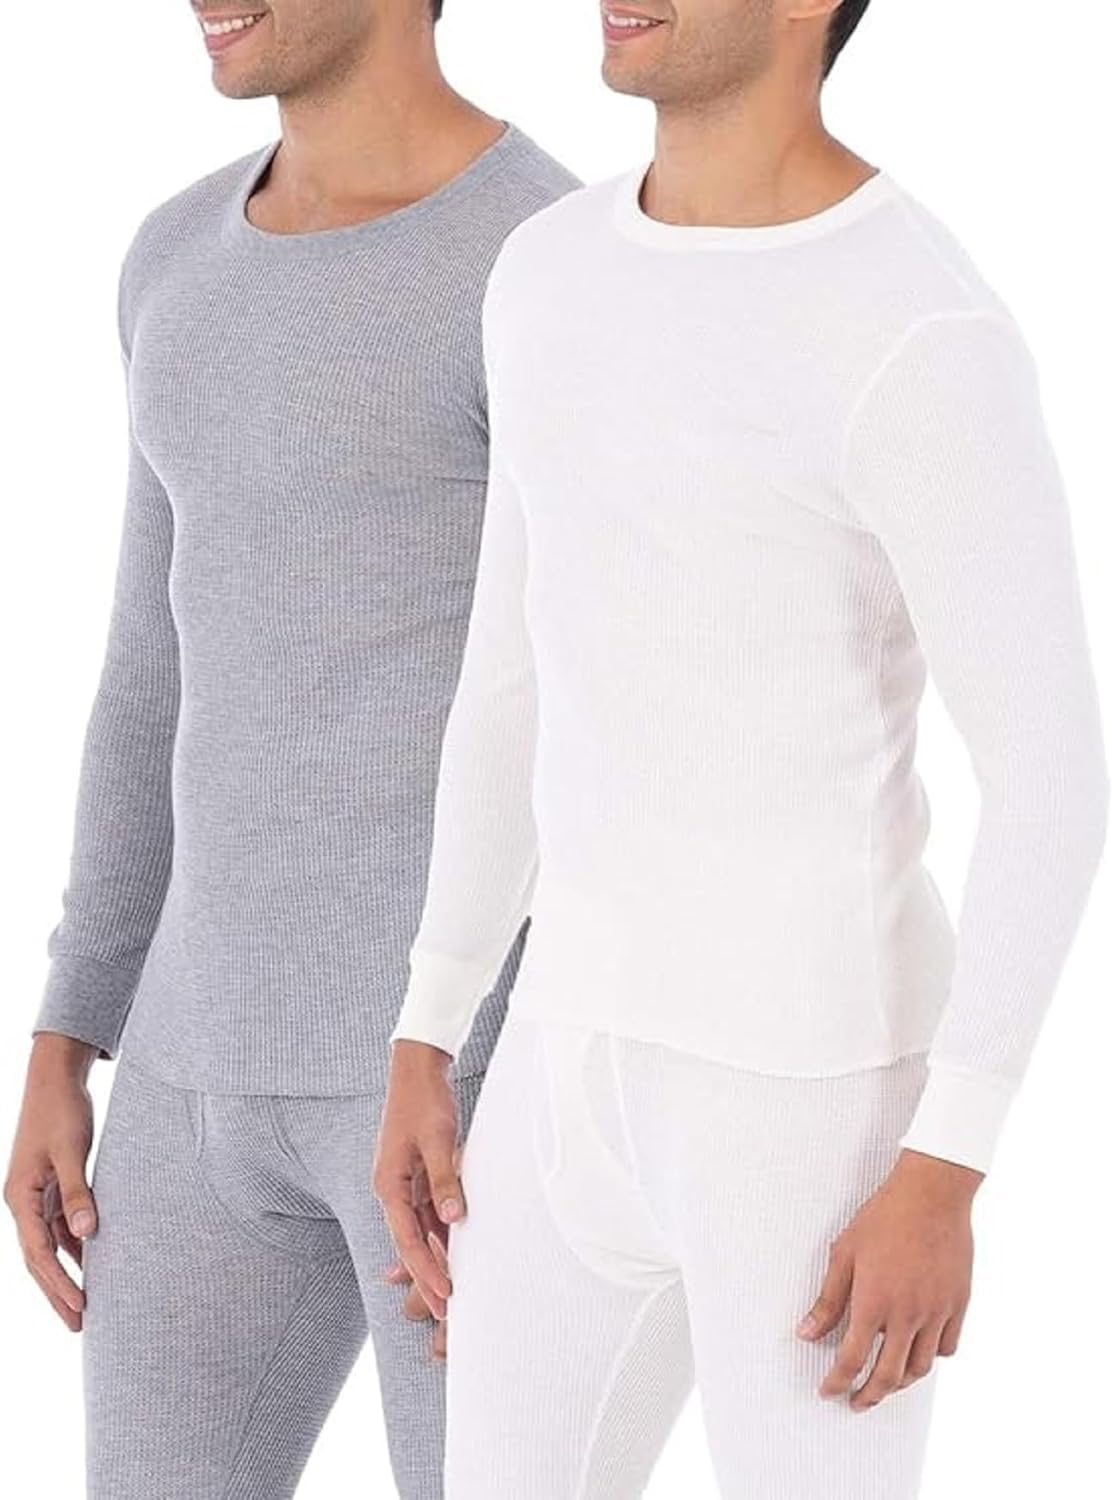 Fruit of the Loom Men' Recycled Waffle Thermal Underwear Crew Top (1 and 2 Packs)